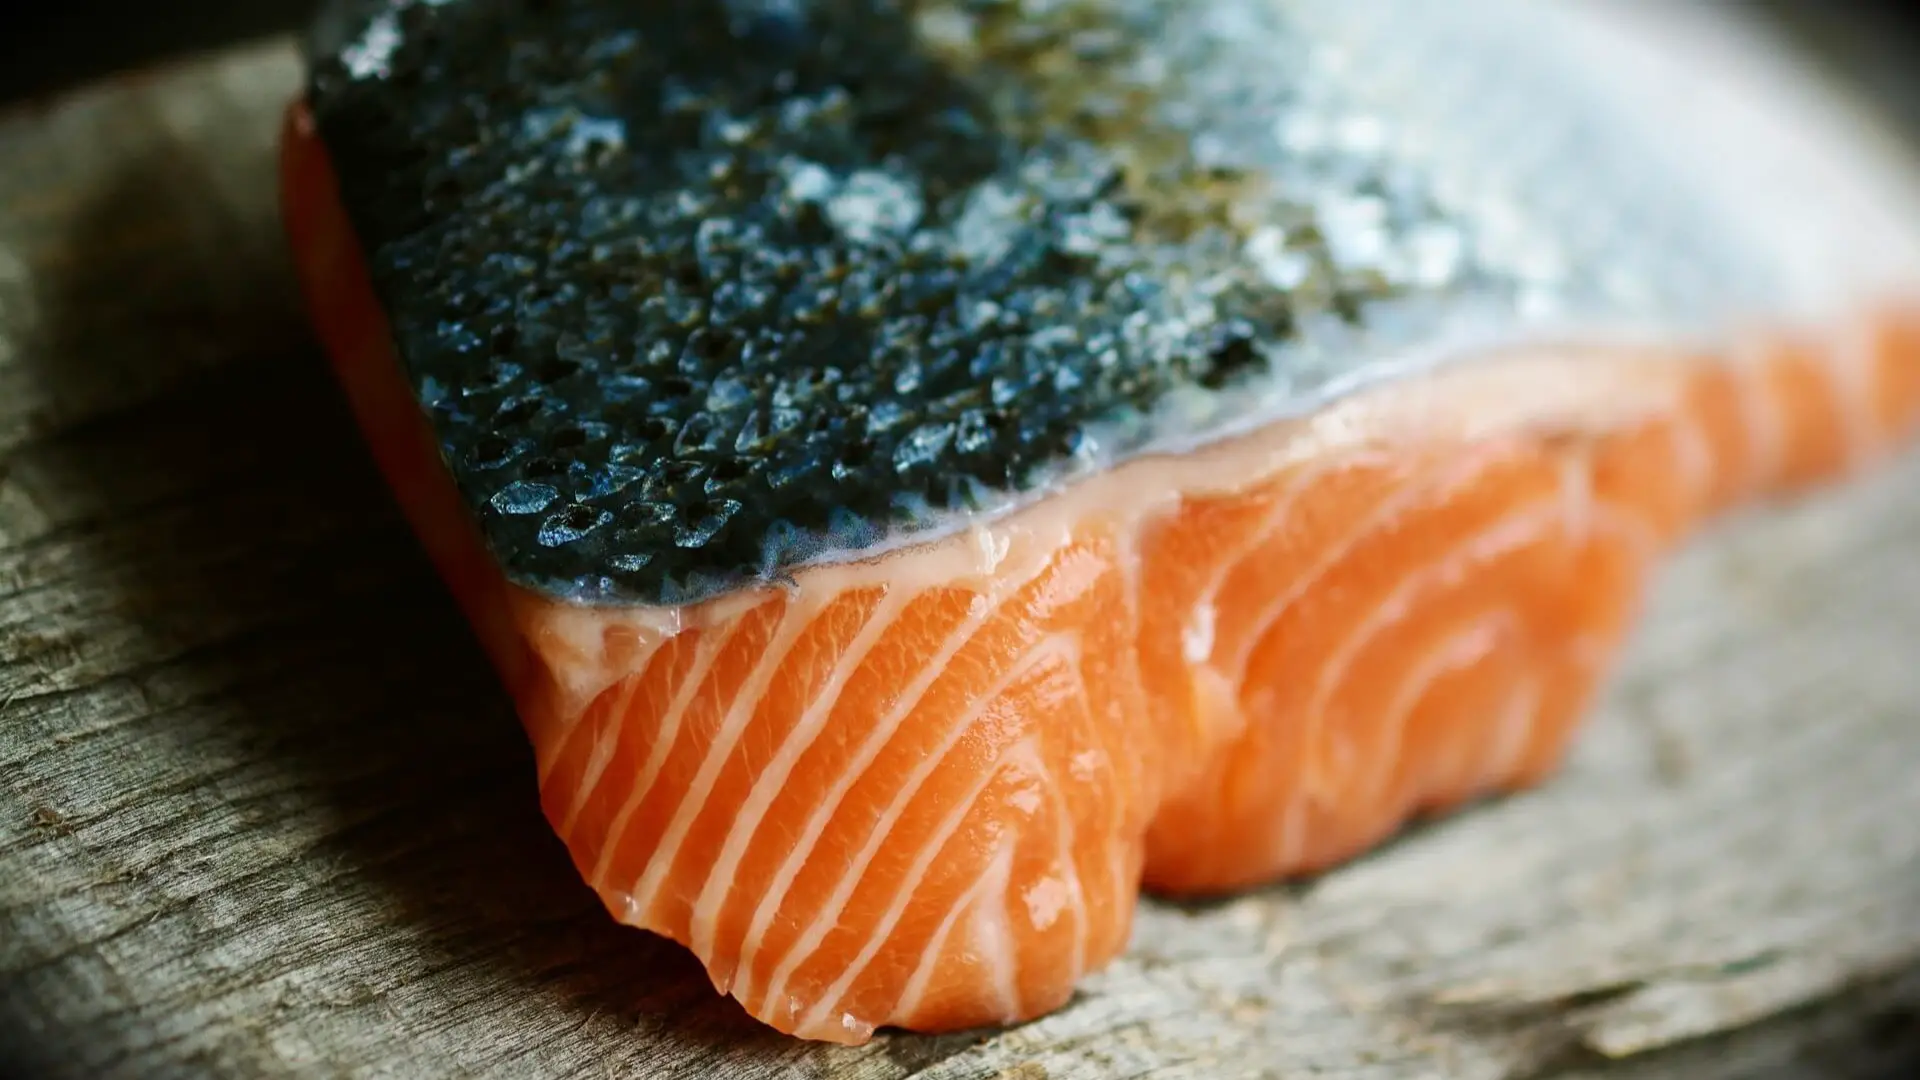 Salmon fillet with skin